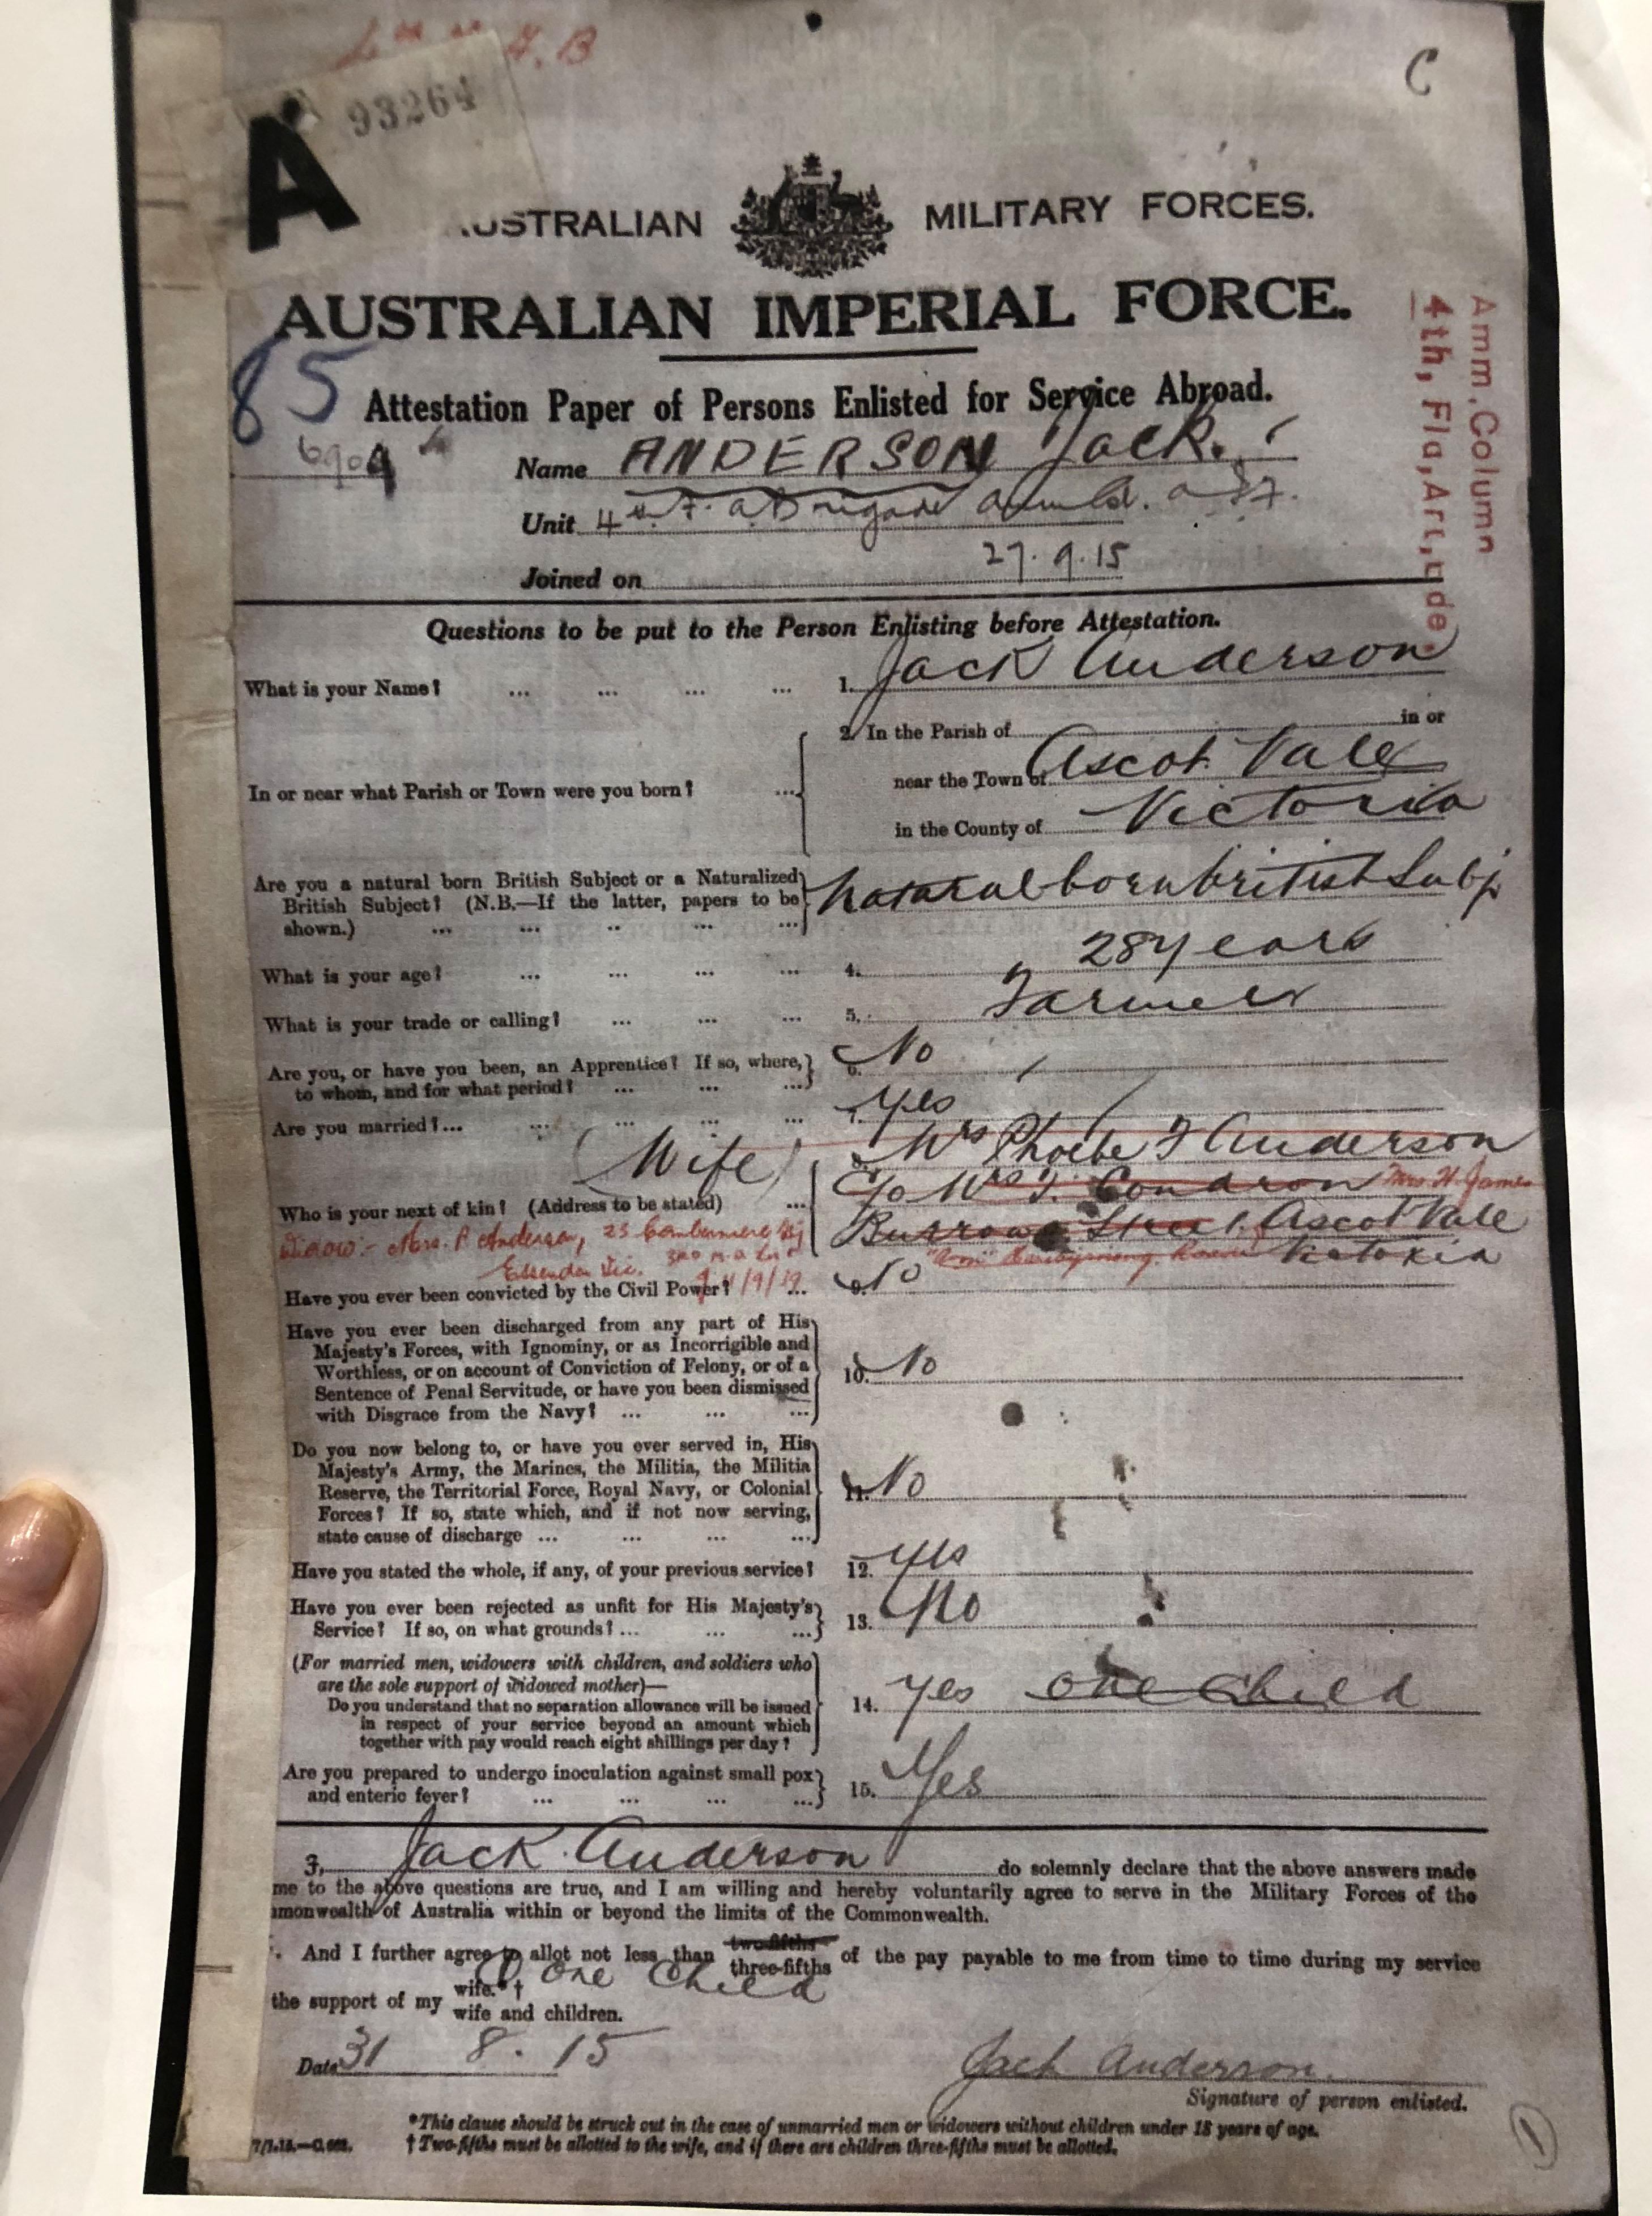 photo of the australian imperial force letterhead